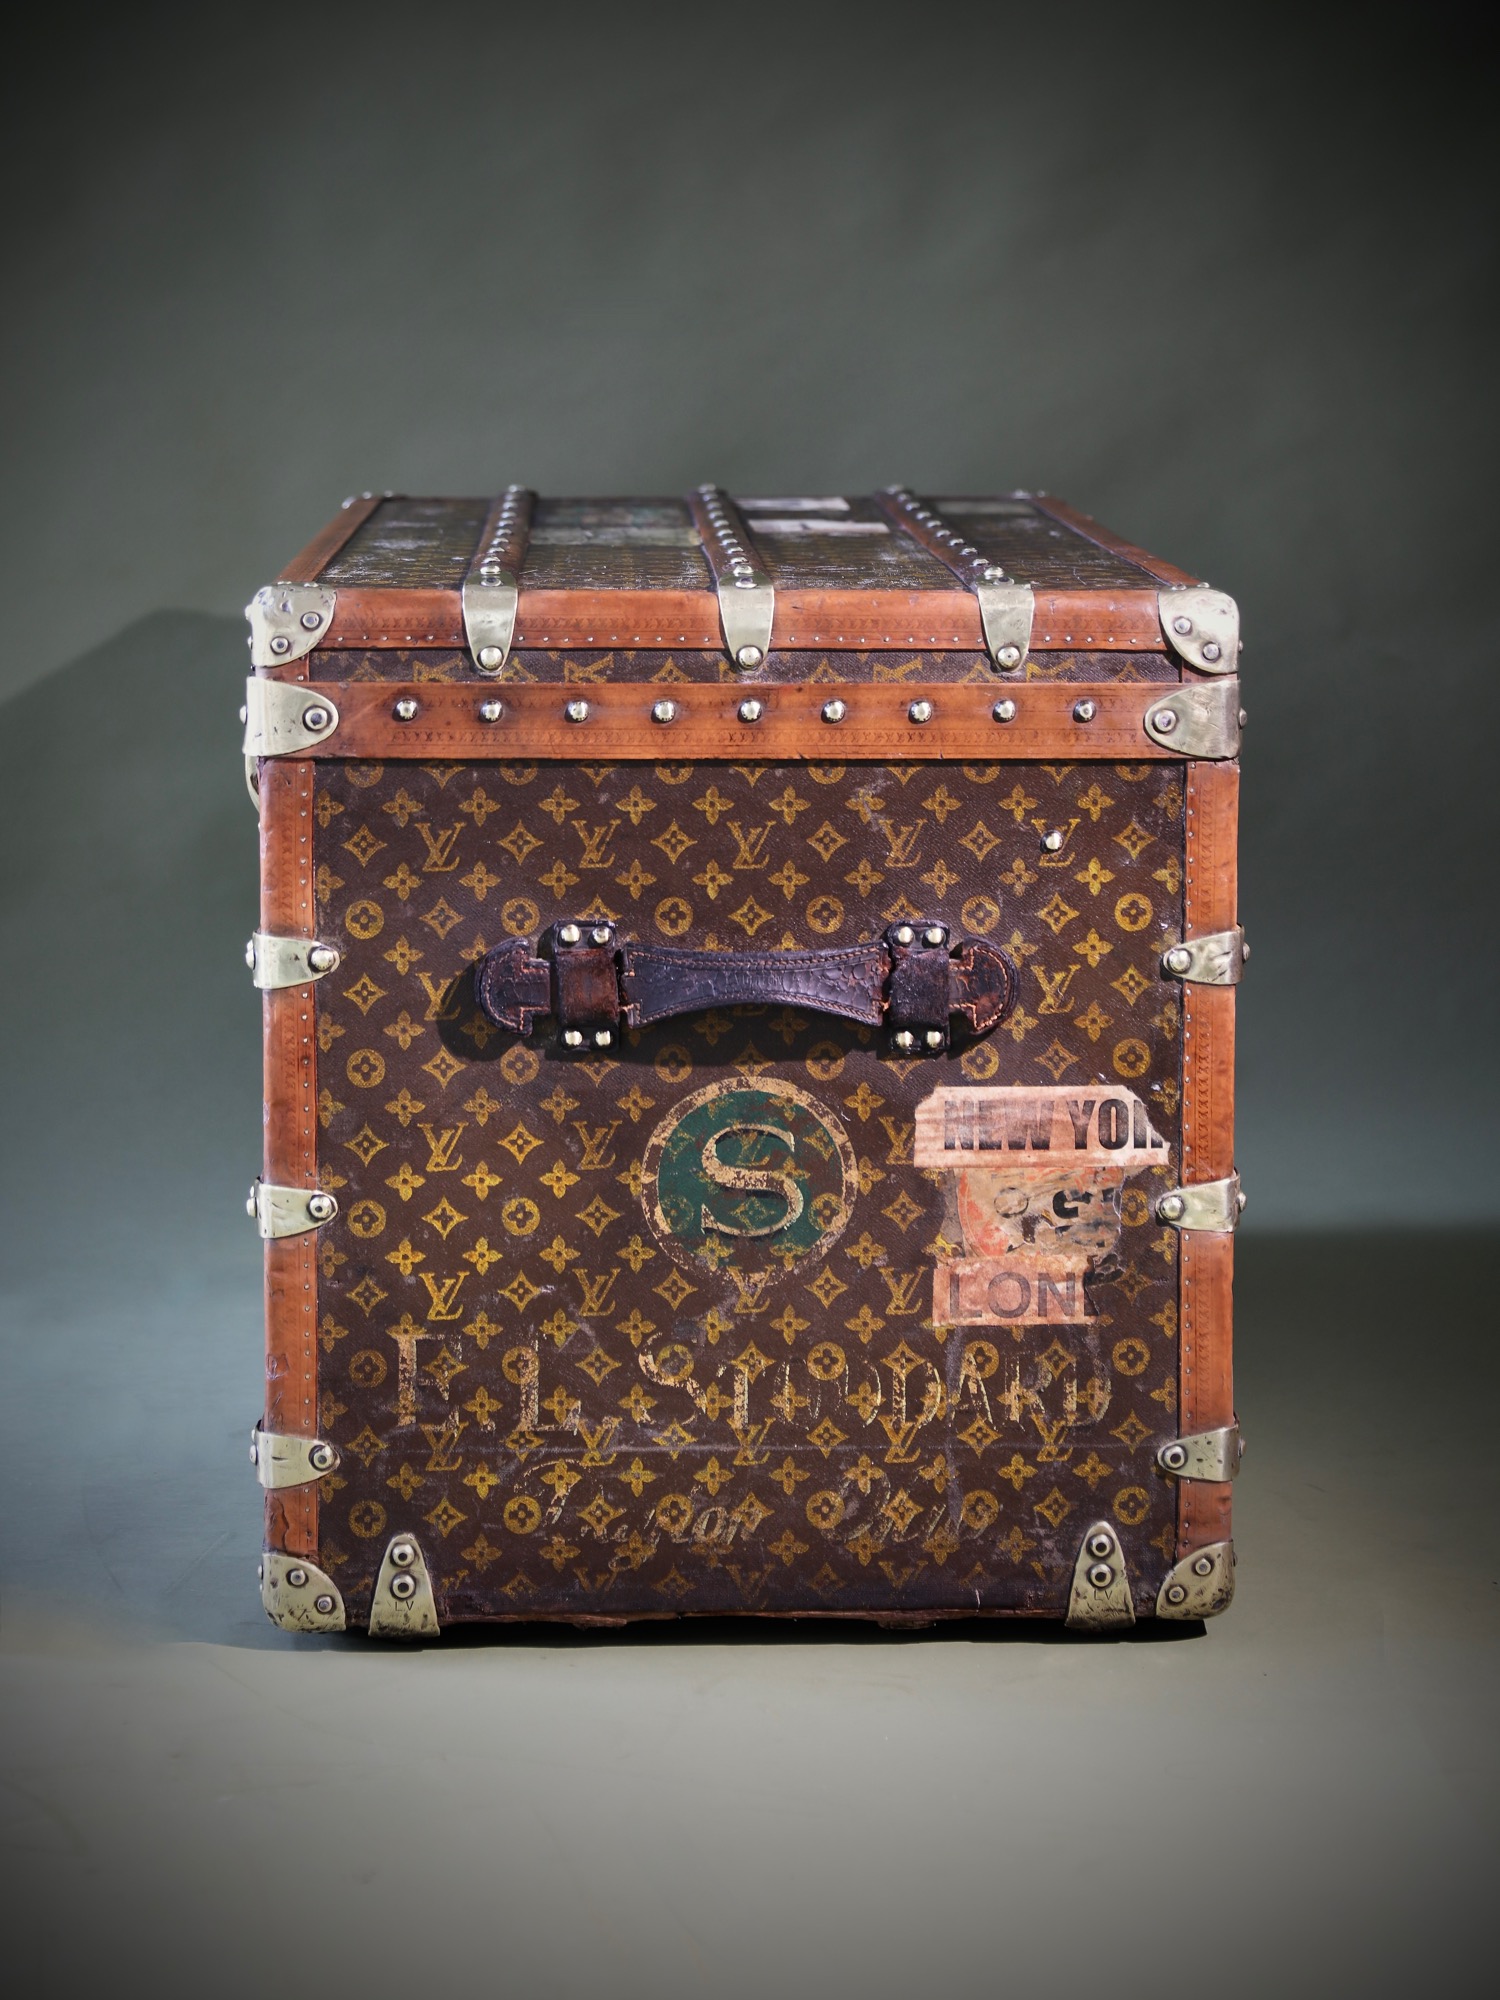 the-well-traveled-trunk-louis-vuitton-thumbnail-product-5766-1